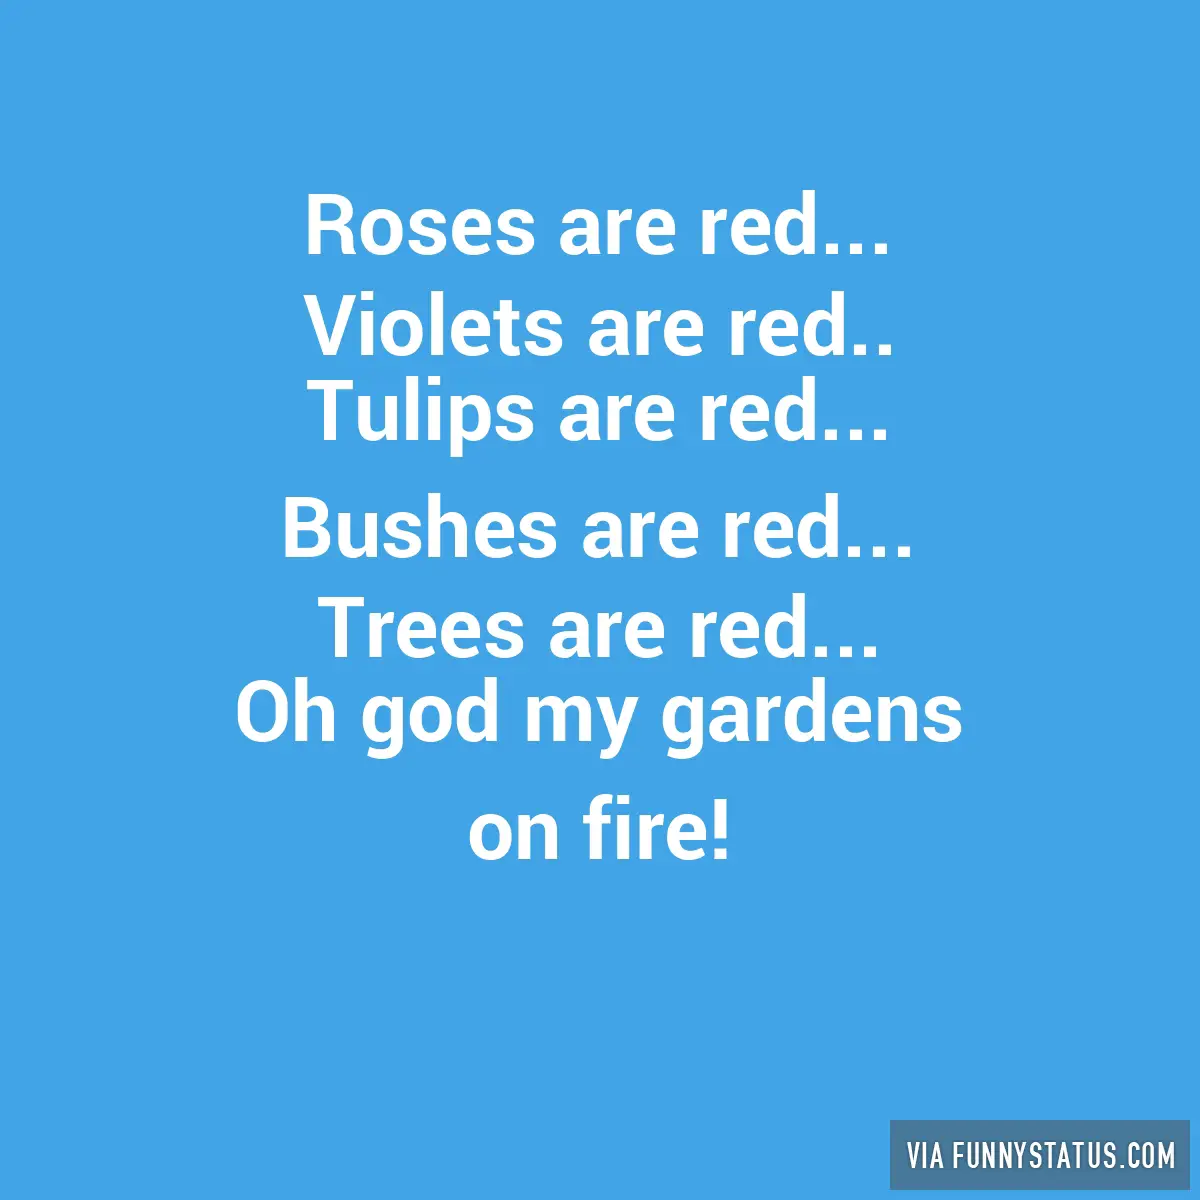 Mean roses are red. 